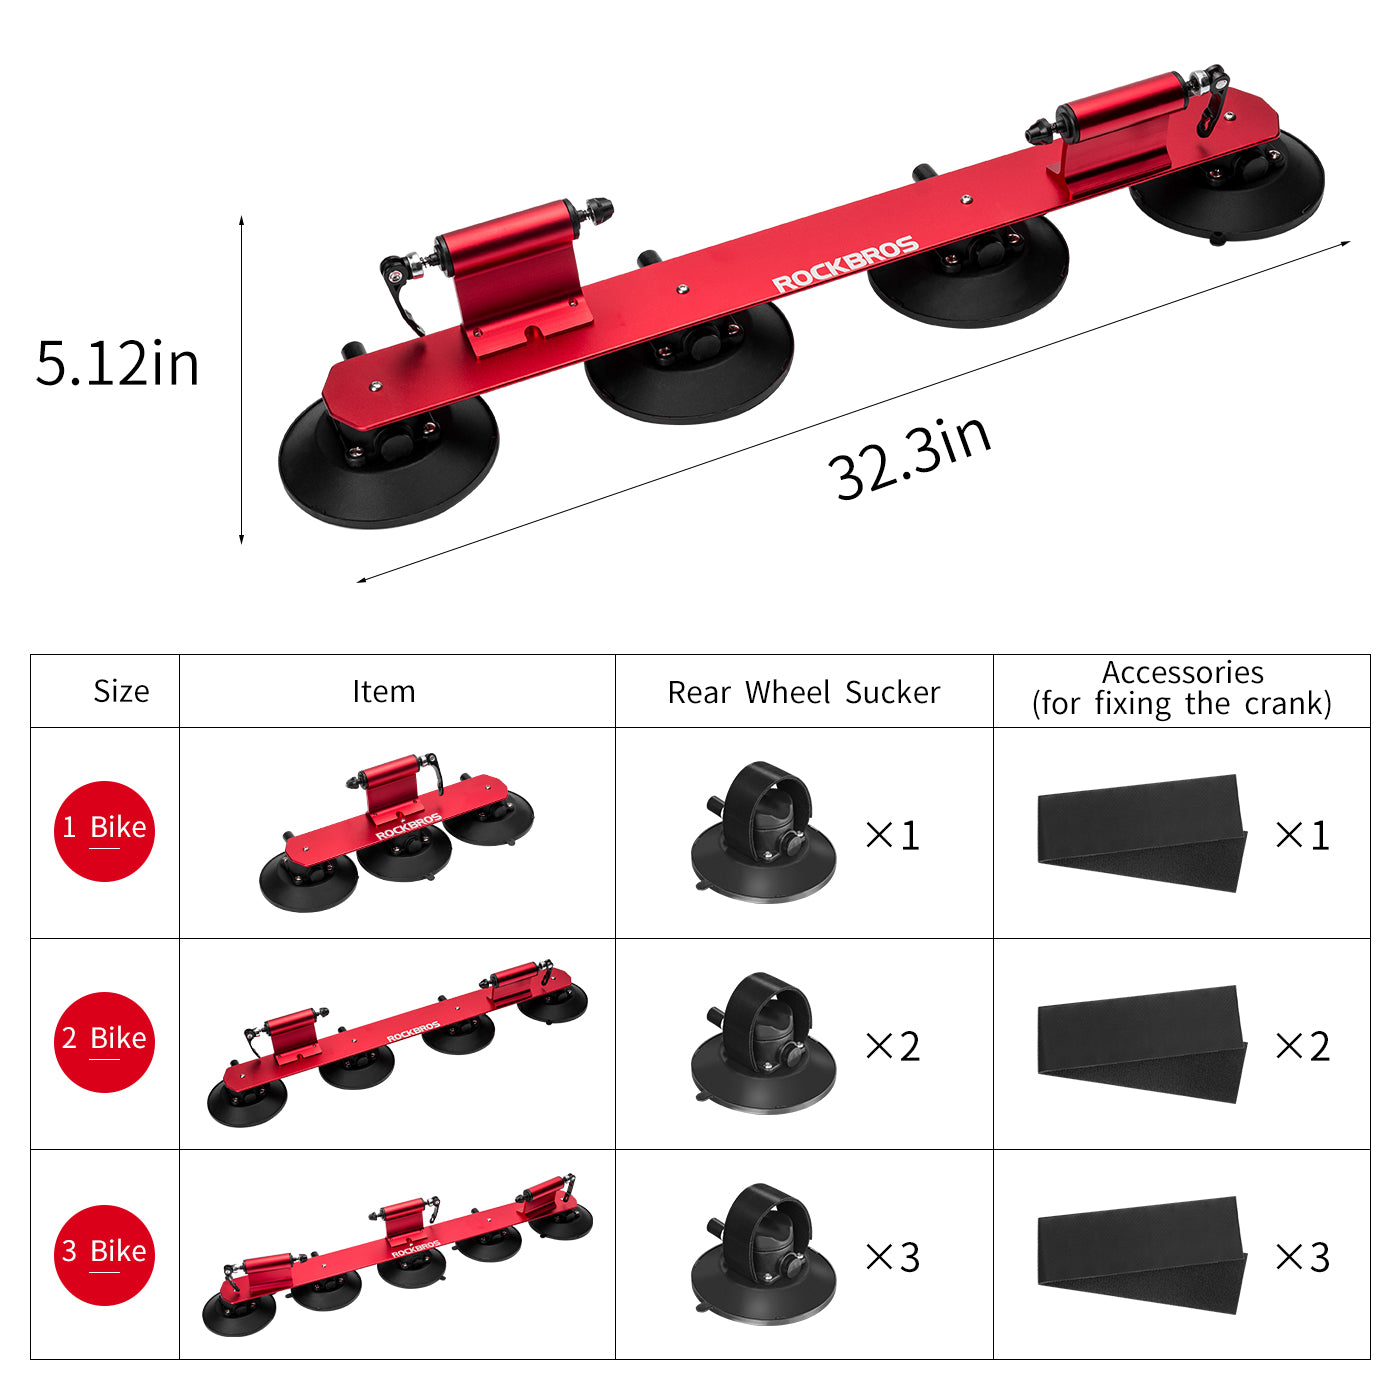 ROCKBROS Suction Cup Car Roof Rack for 2 Bikes - Red